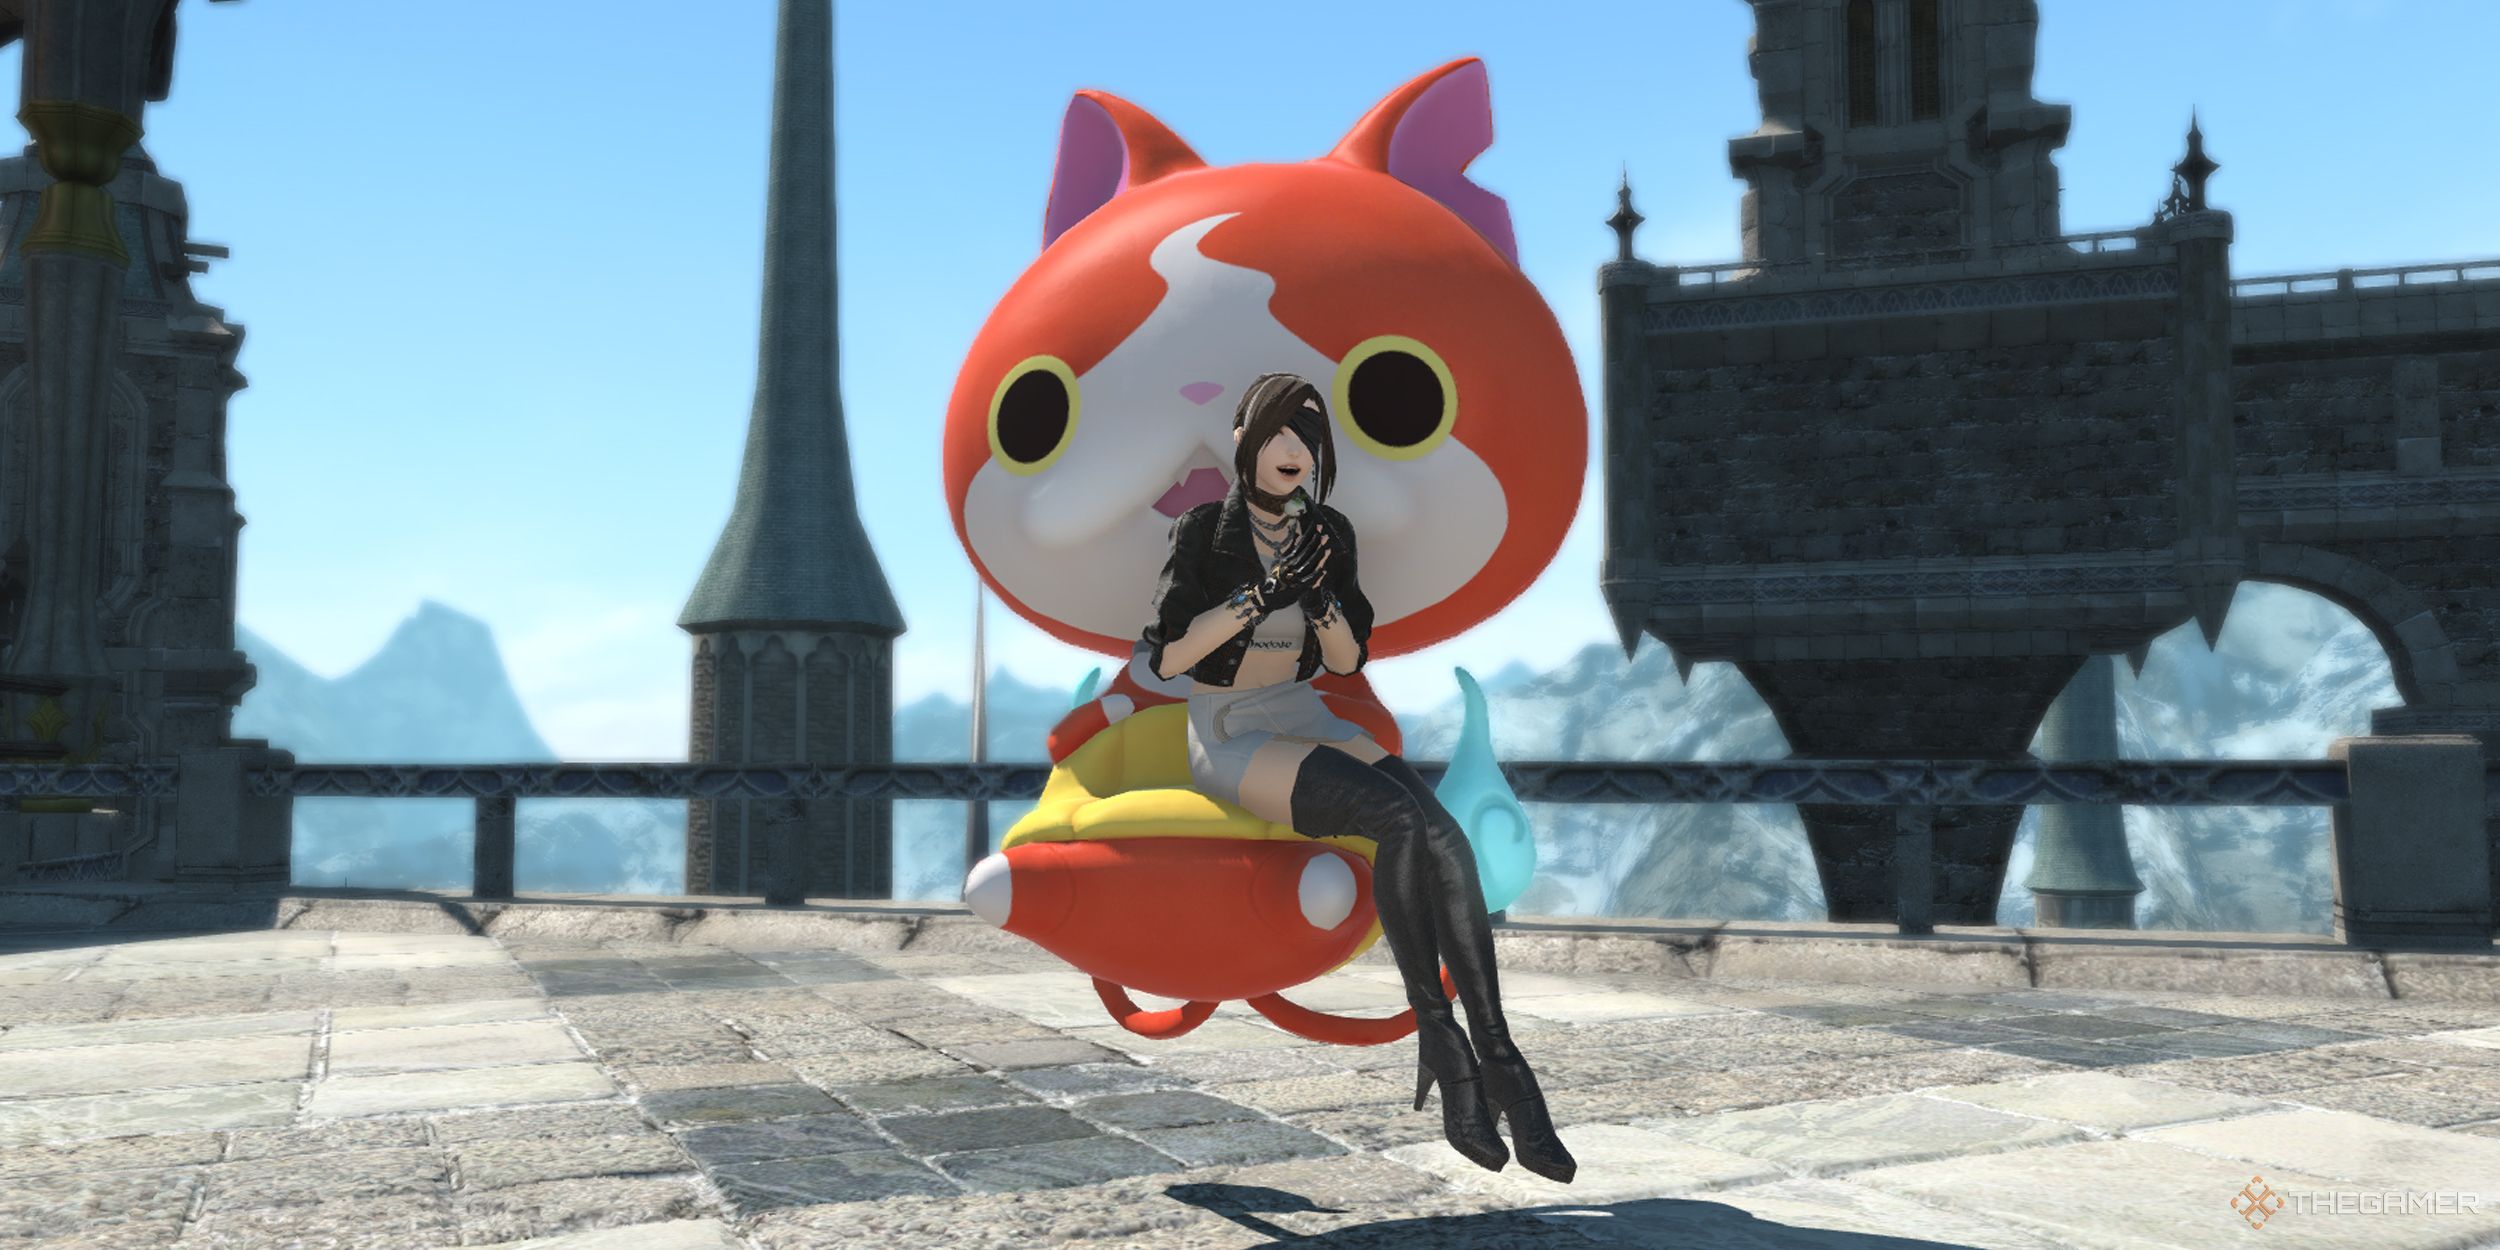 The Warrior of Light sat on the Jibanyan couch mount in Final Fantasy 14.